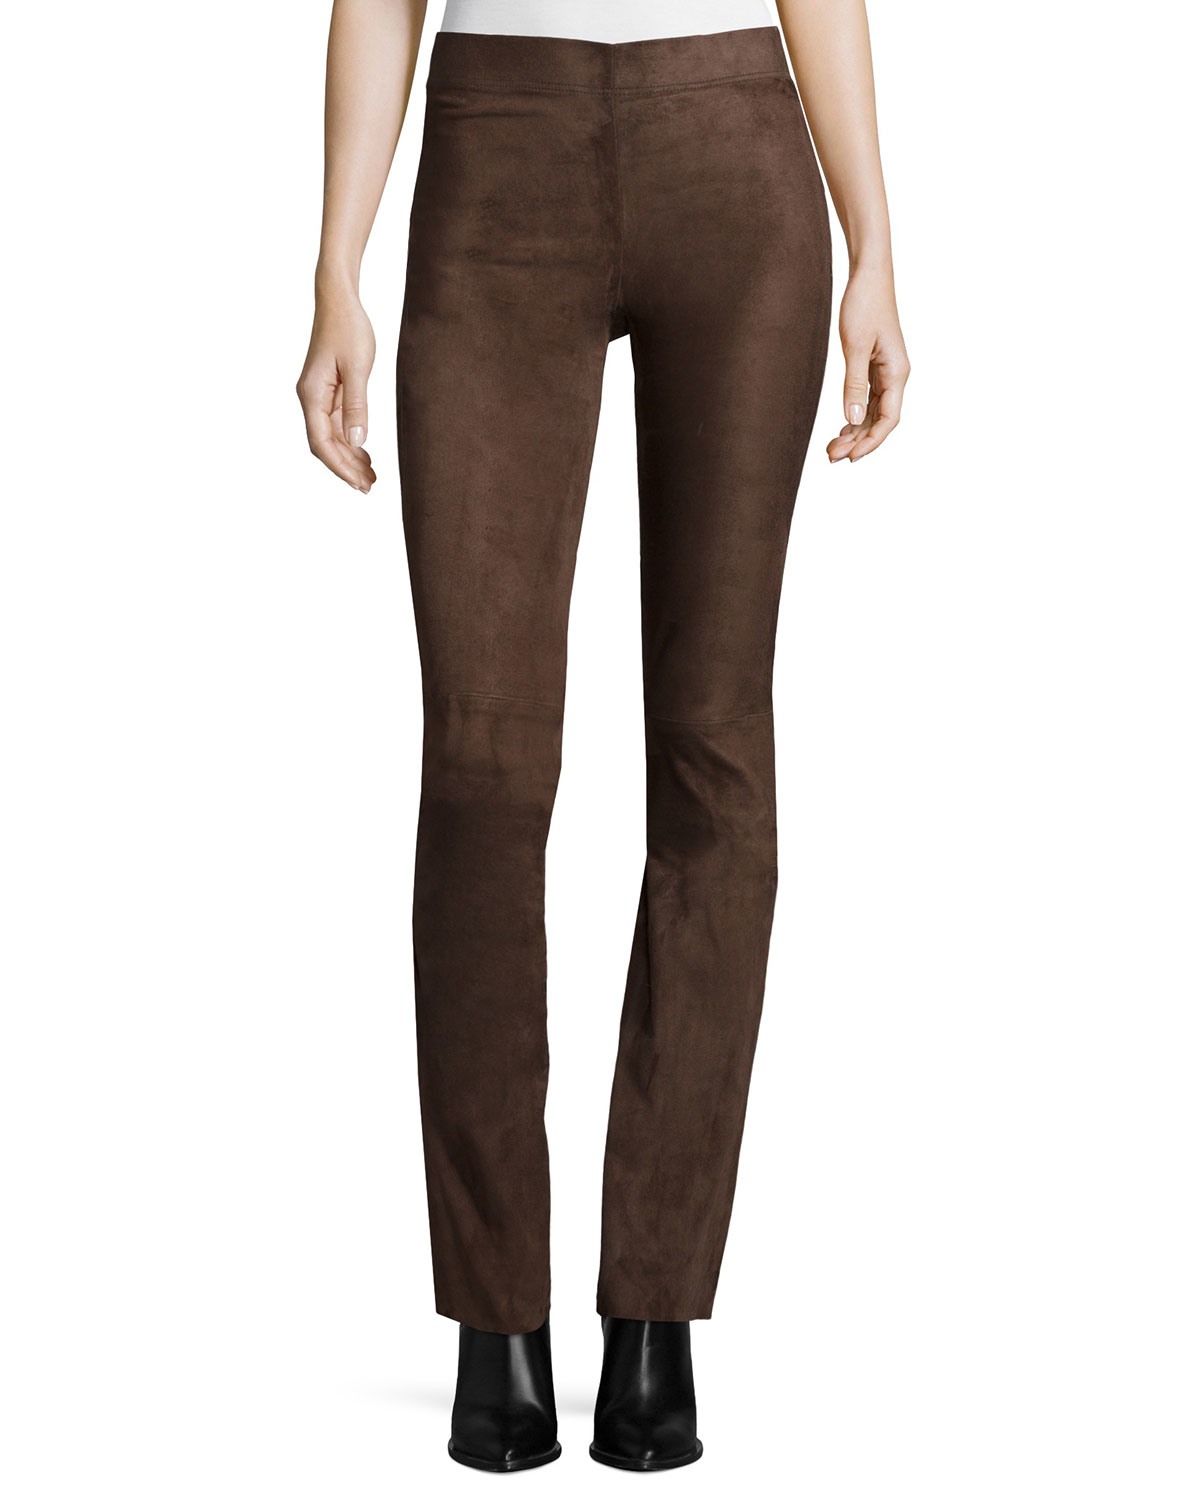 Brown Flare Leggings Outfits For Men  International Society of Precision  Agriculture